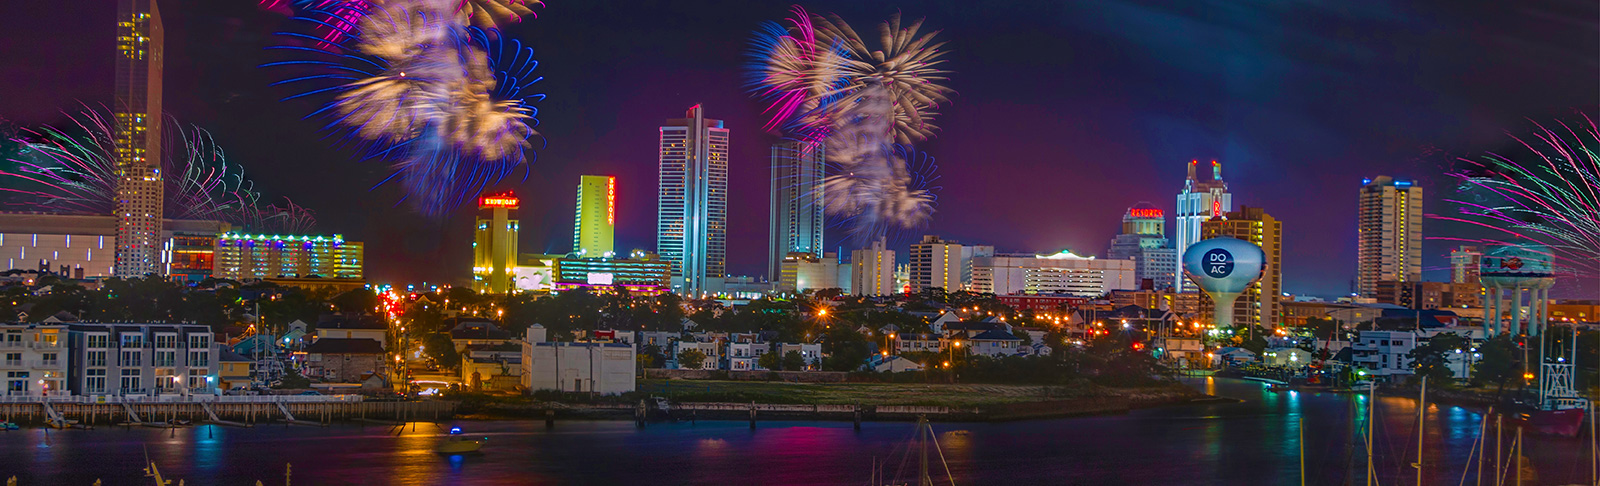 Fireworks Atlantic City Skyline at night overlooking Gardner's Basin. DO AC water tower in view. 